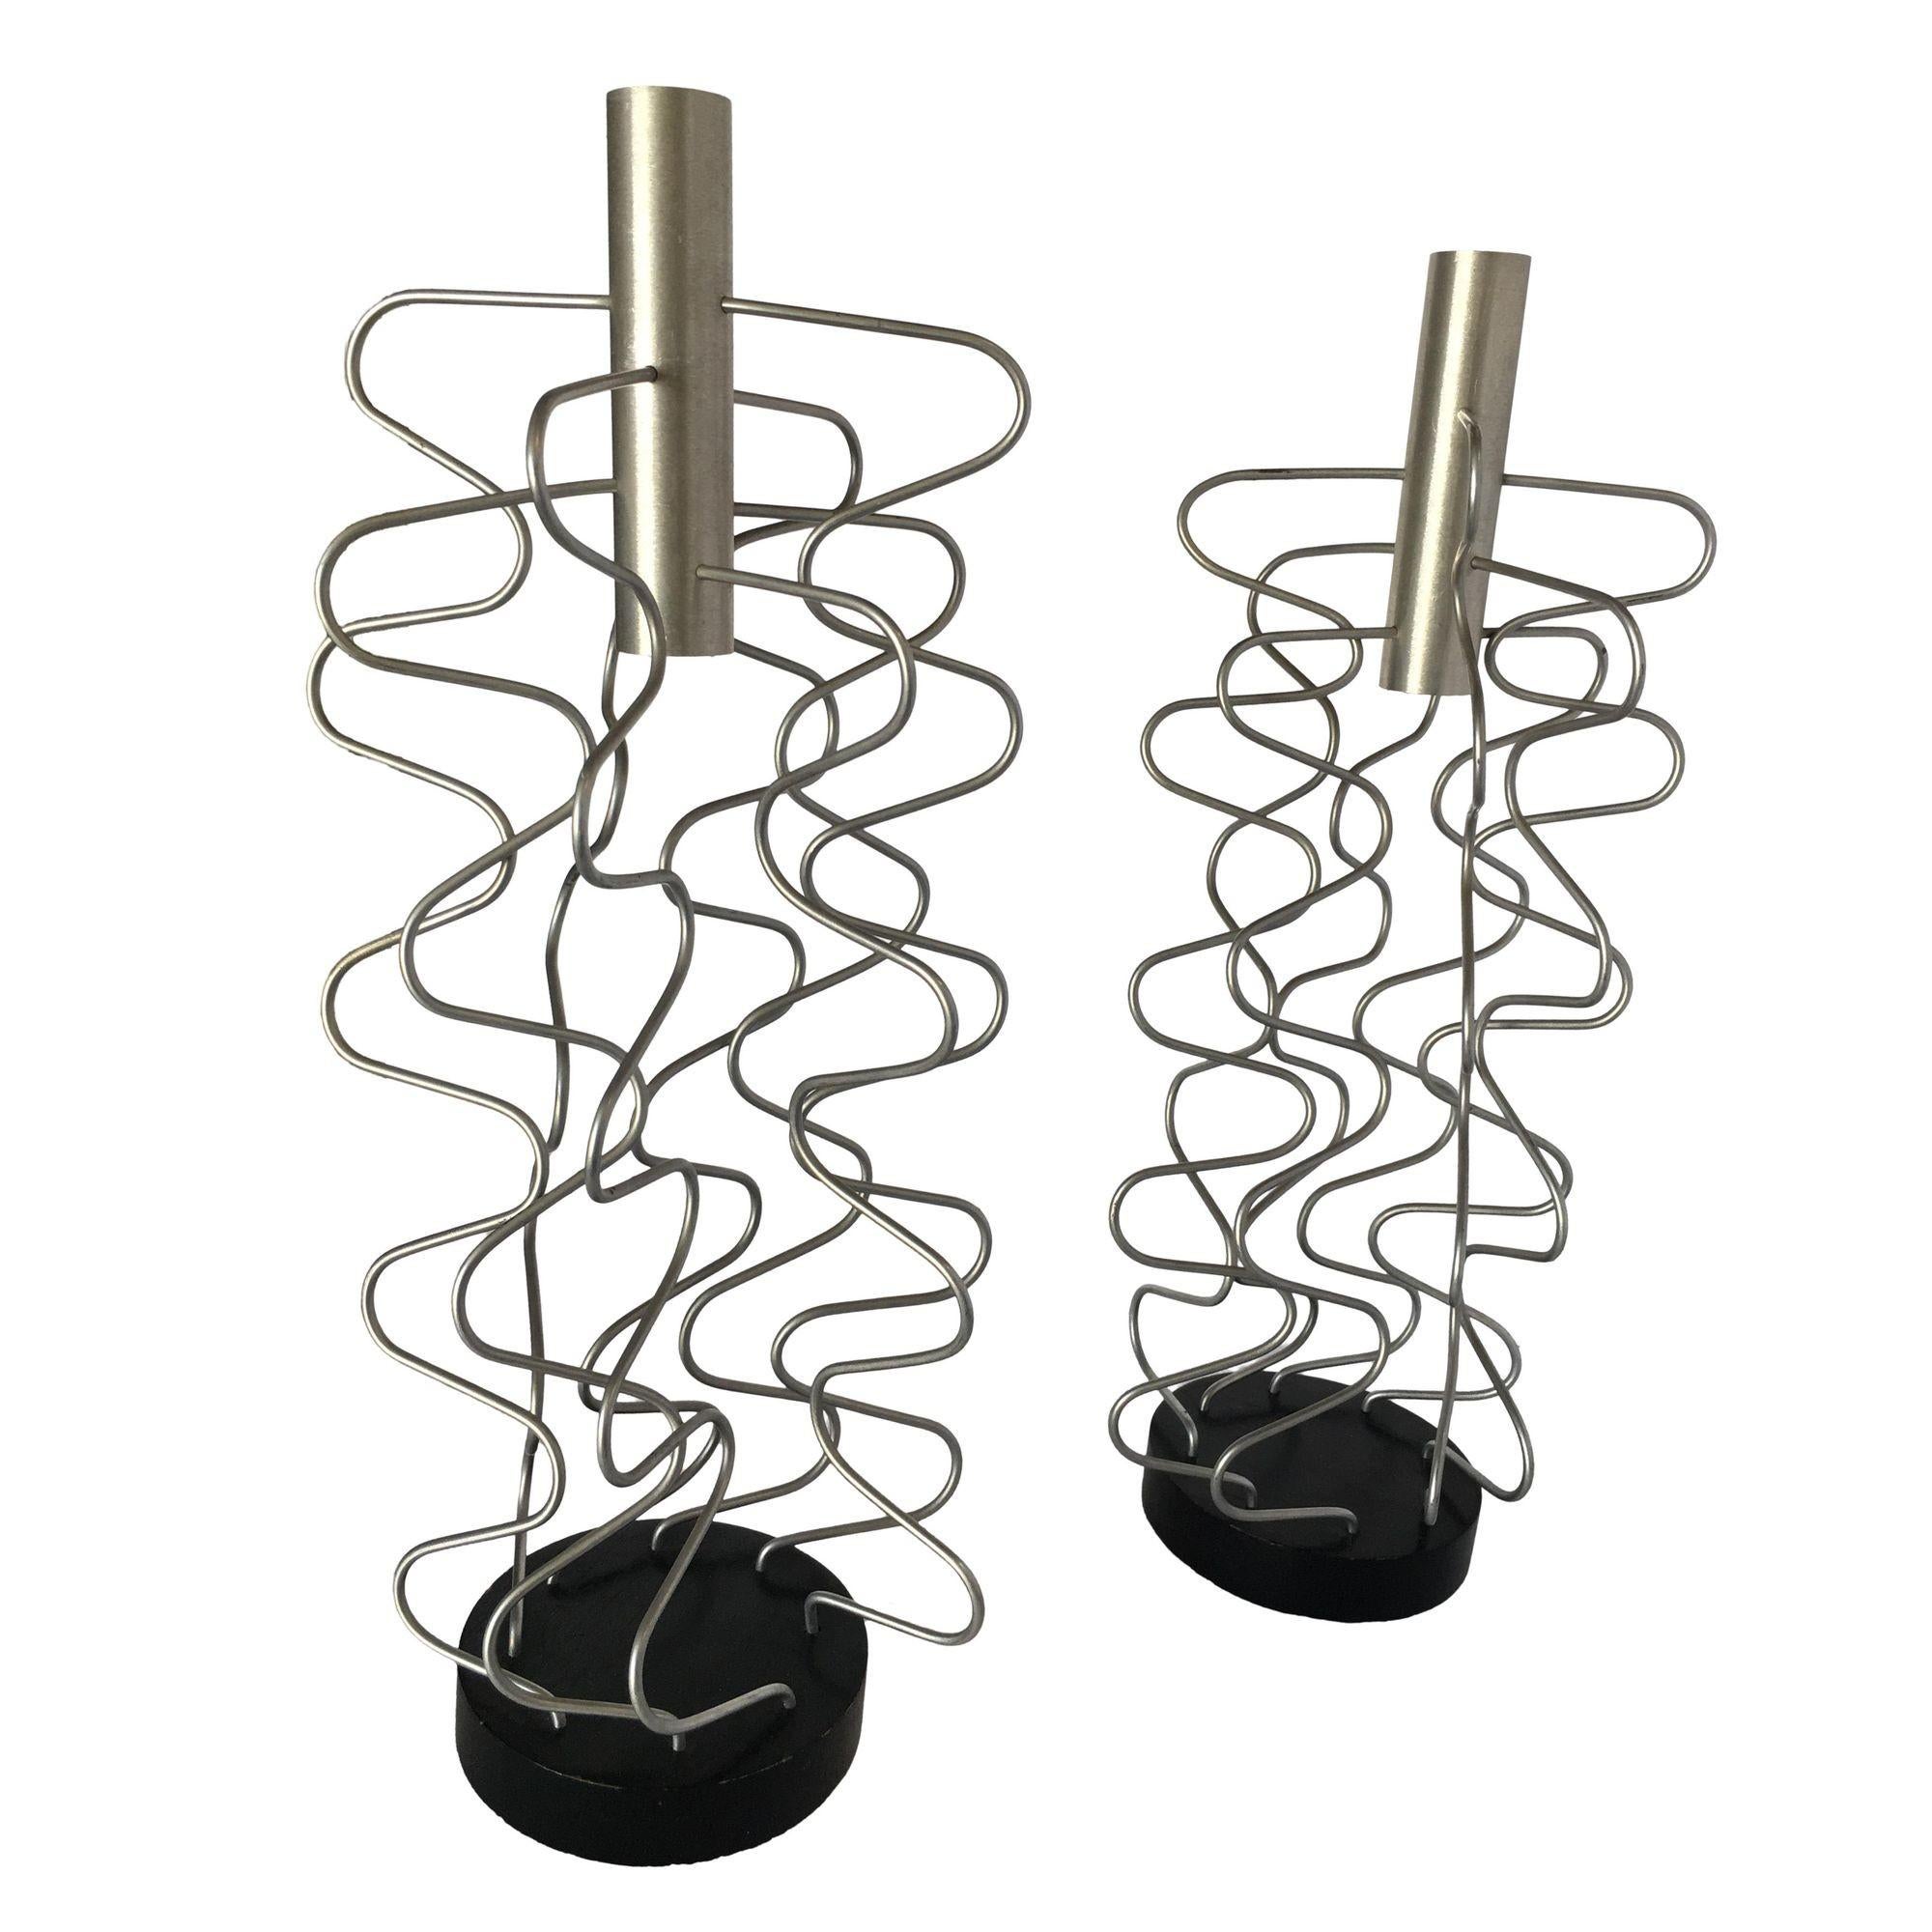 Pair of custom Made Wire Art candlestick holders made of 8 sculptural wire pieces fixed to a black base with chrome holder along the top.